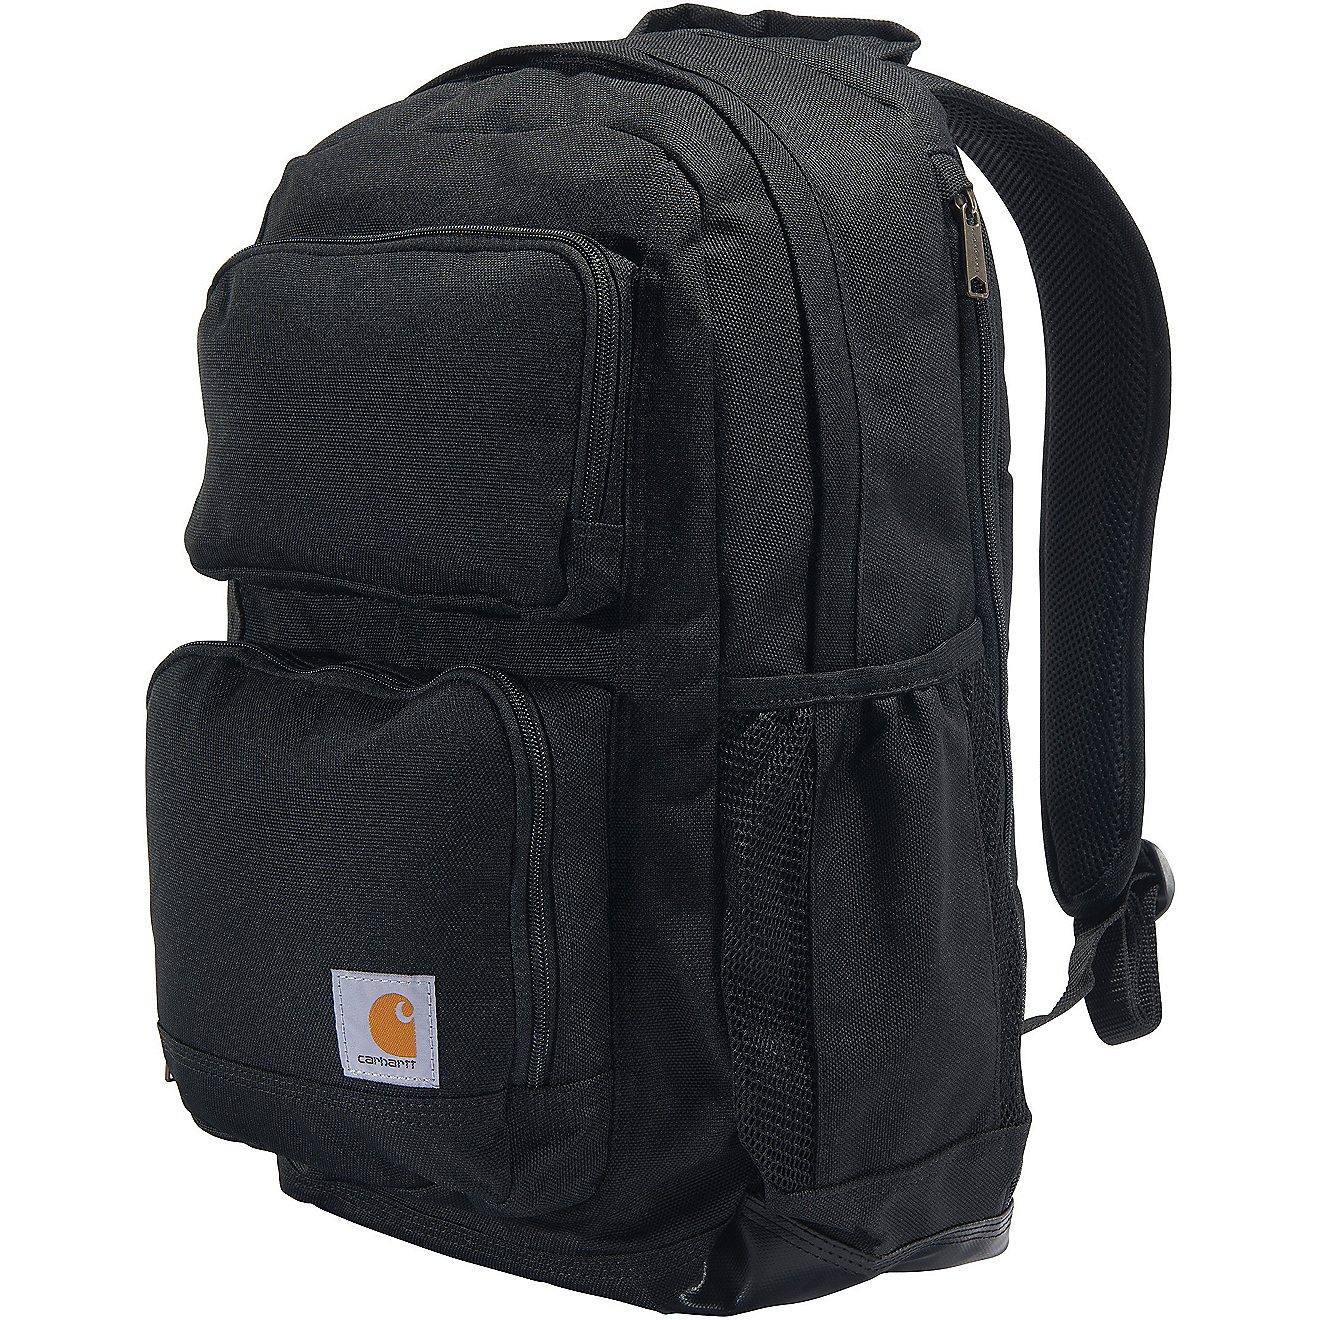 Carhartt 28 L Dual-Compartment Backpack | Academy